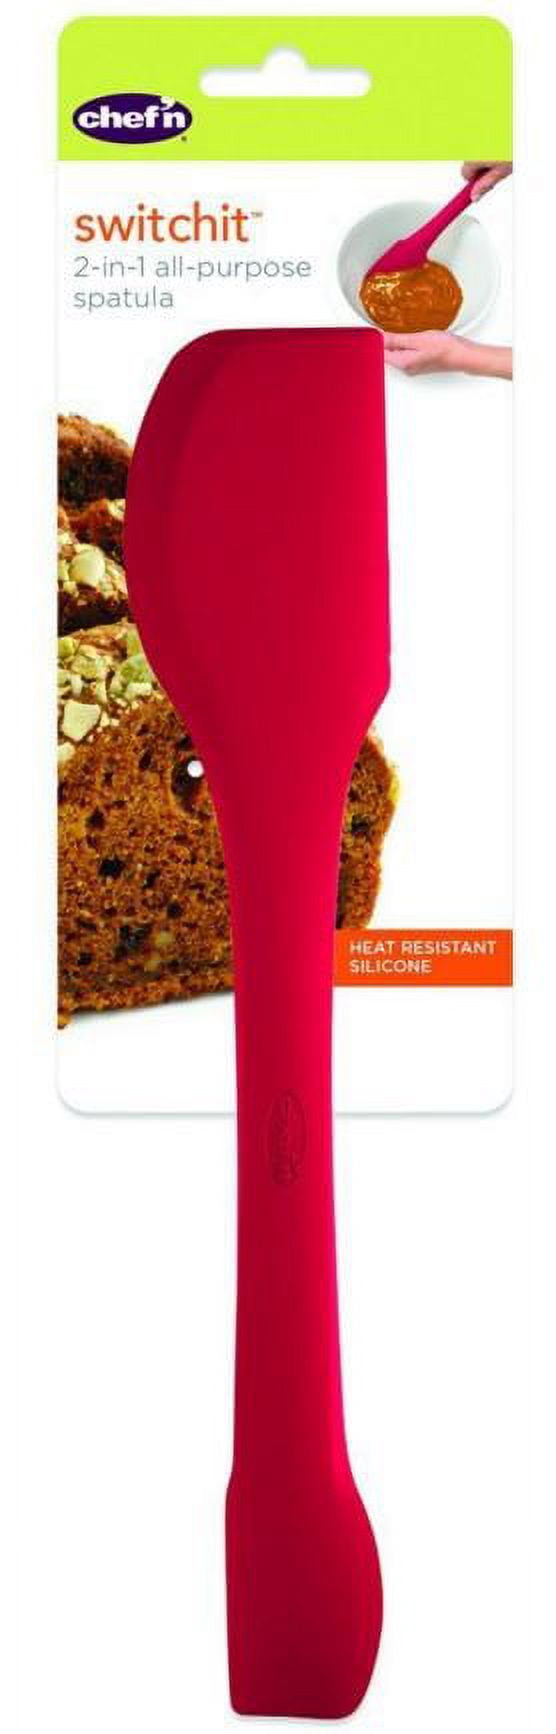 Chef'n Switchit Narrow Spatula - Double Sided Silicone Spatula - Cherry